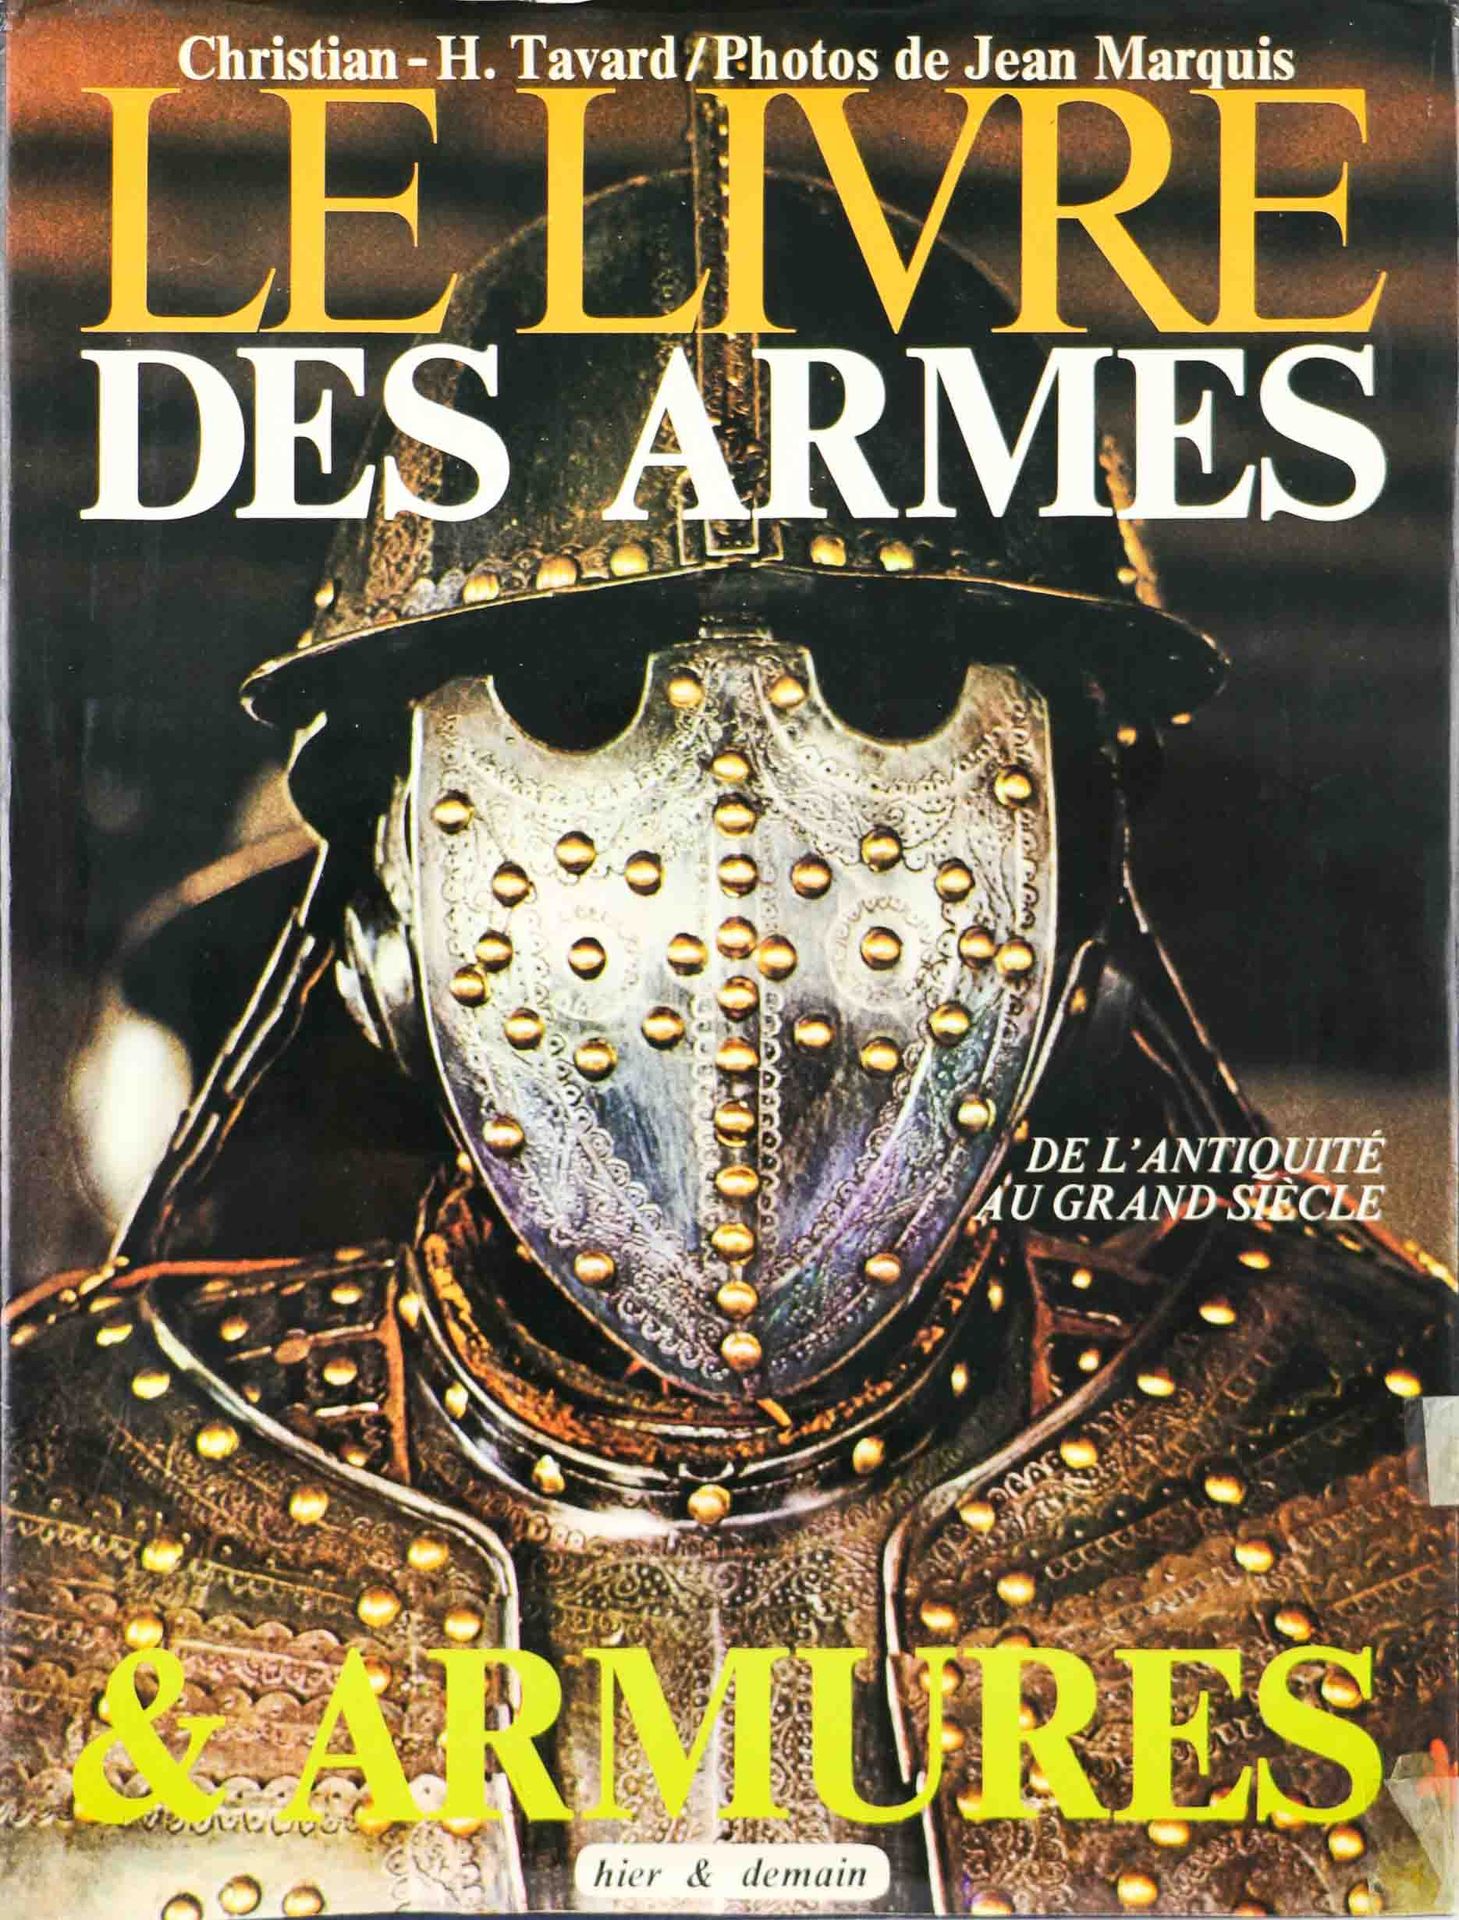 Null "The Book of Arms"

H. Tovard. Editions hier et demain